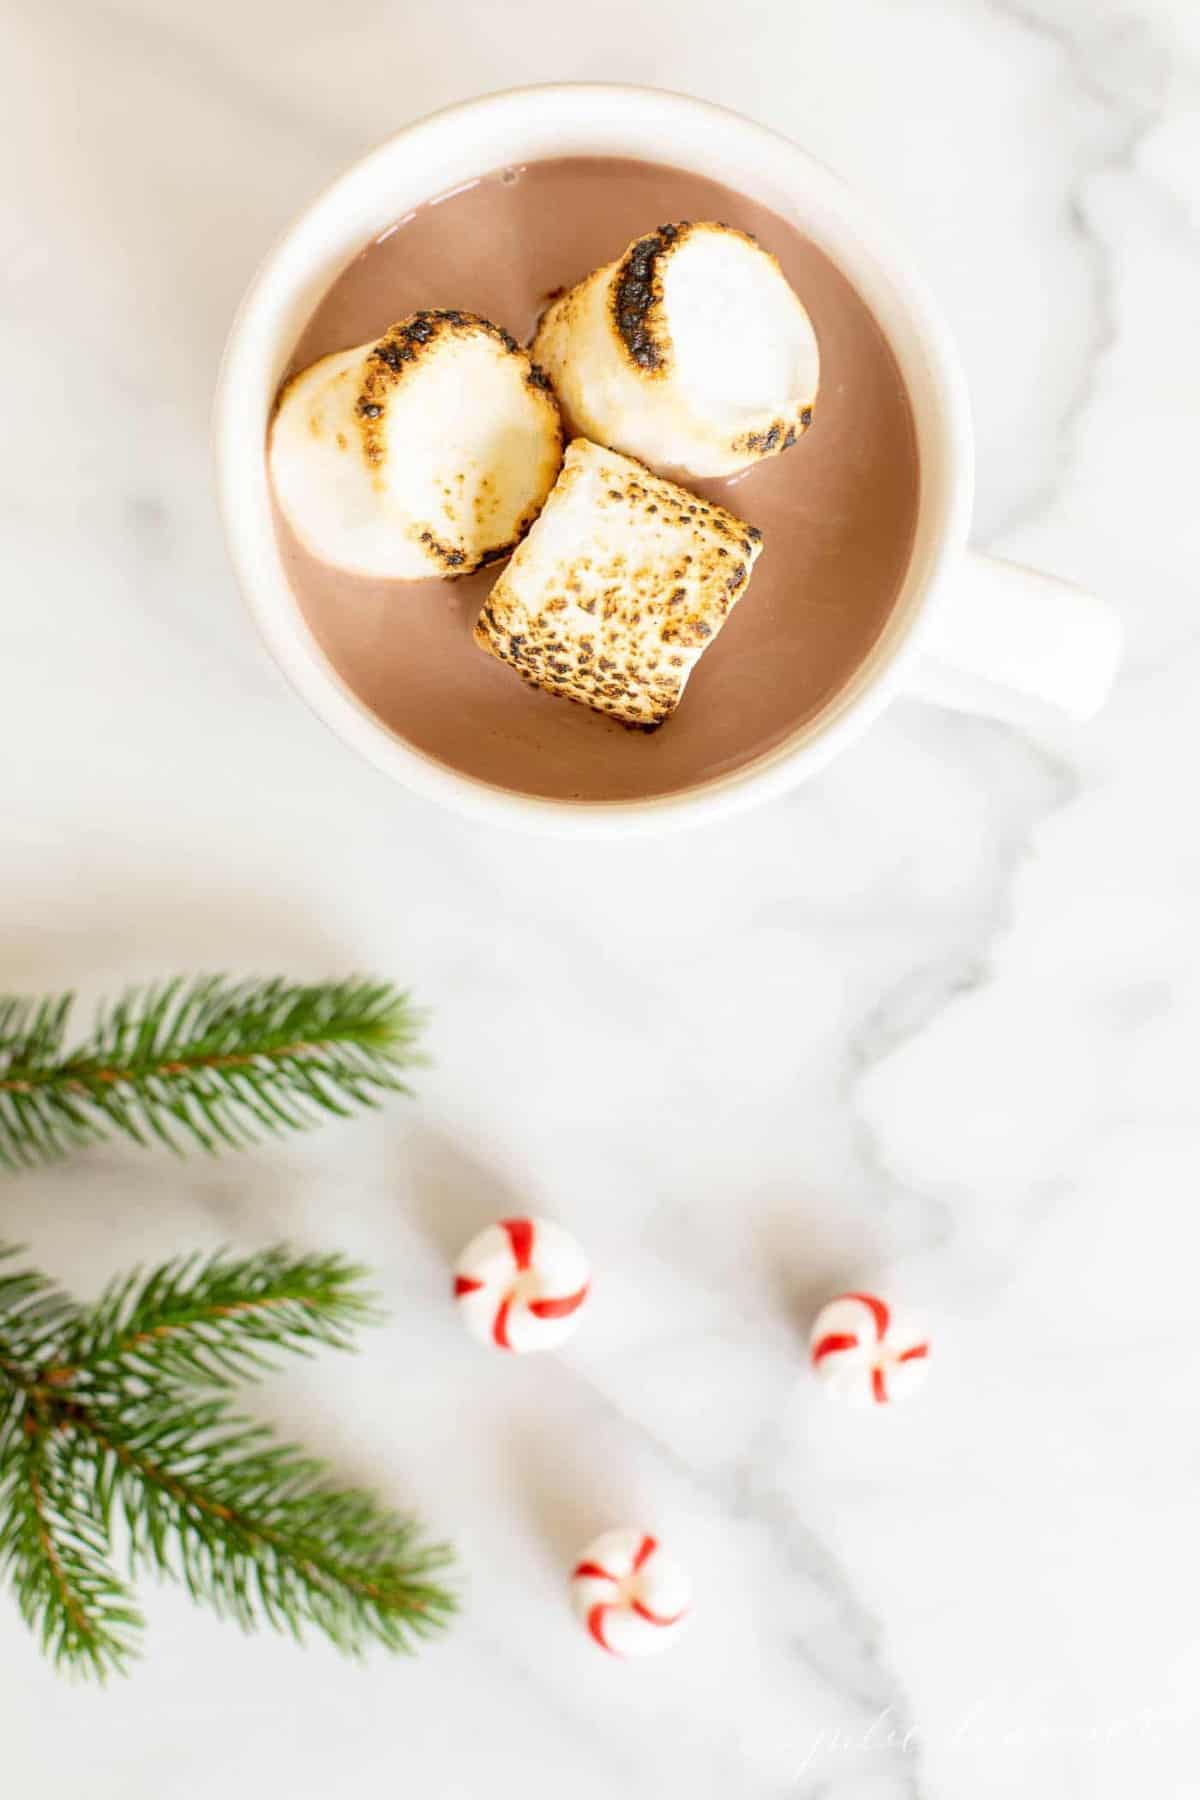 Looking into a mug of peppermint hot chocolate, marshmallows on top, greenery touch and peppermint candies to the side.